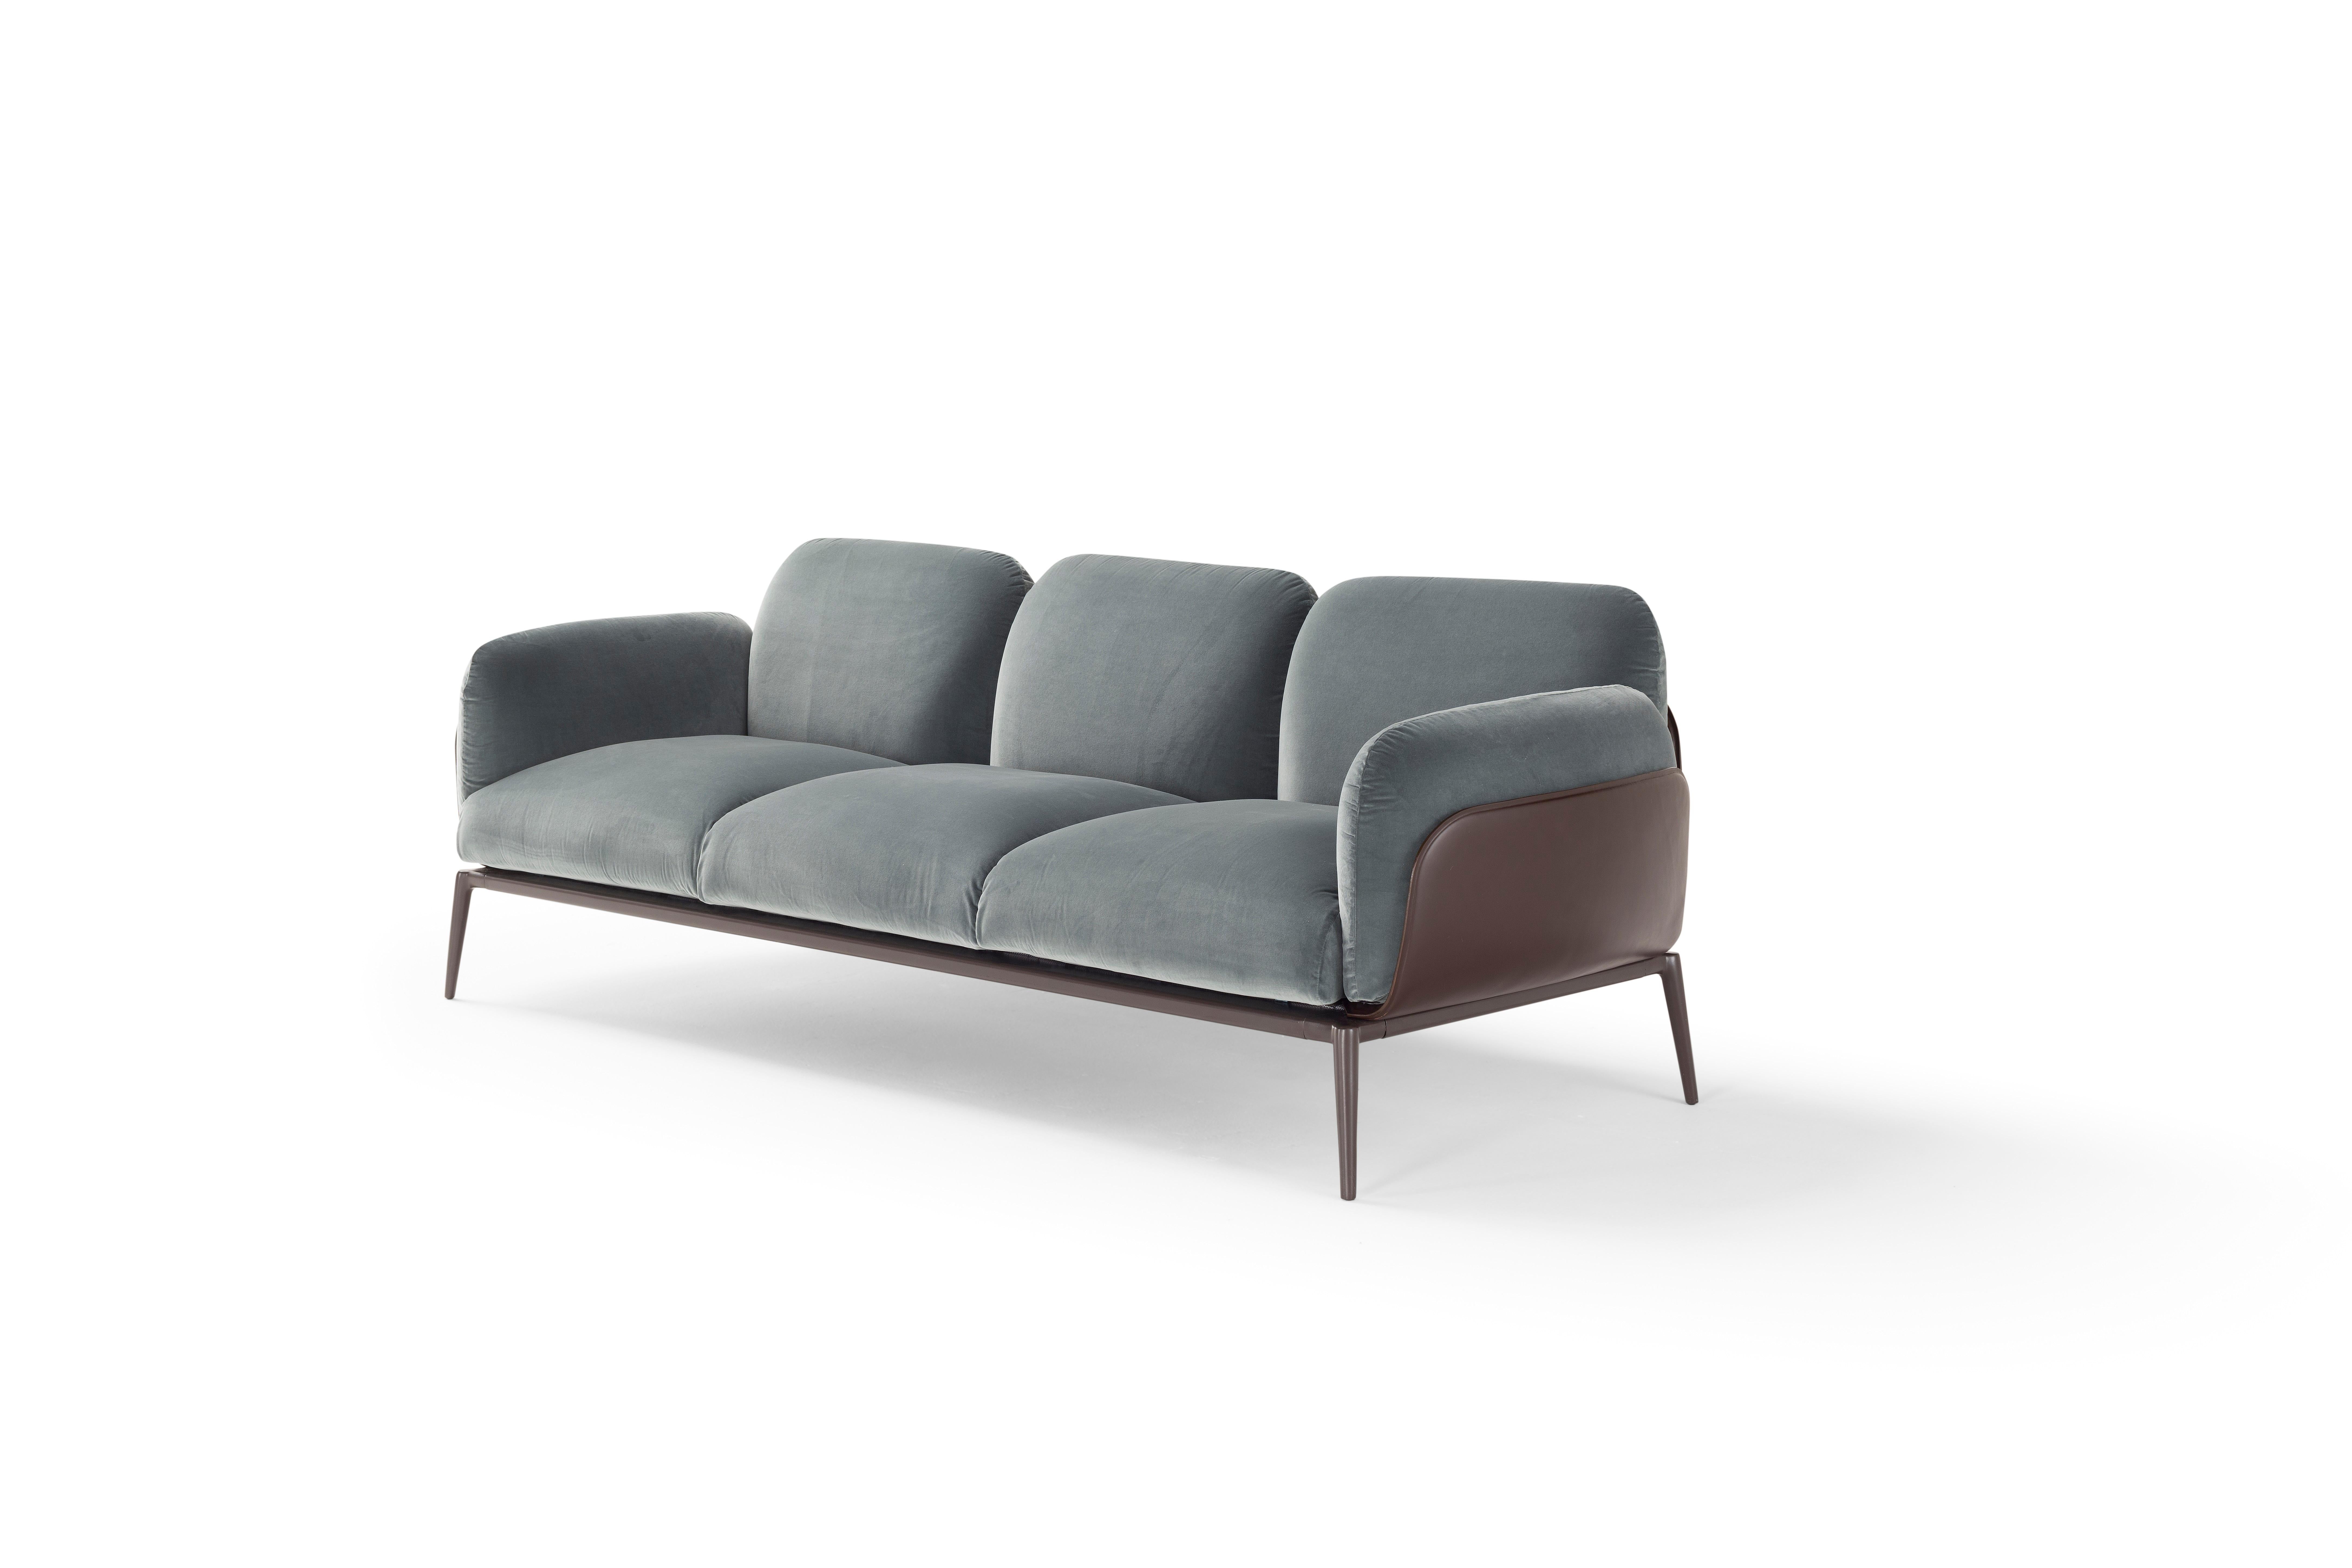 The Brooklyn sofa takes its inspiration from the New York neighborhood of Brooklyn: a hotspot of trends springing from diverse styles. With its strong personality, the Brooklyn sofa is born from the intersection of extremely innovative materials in